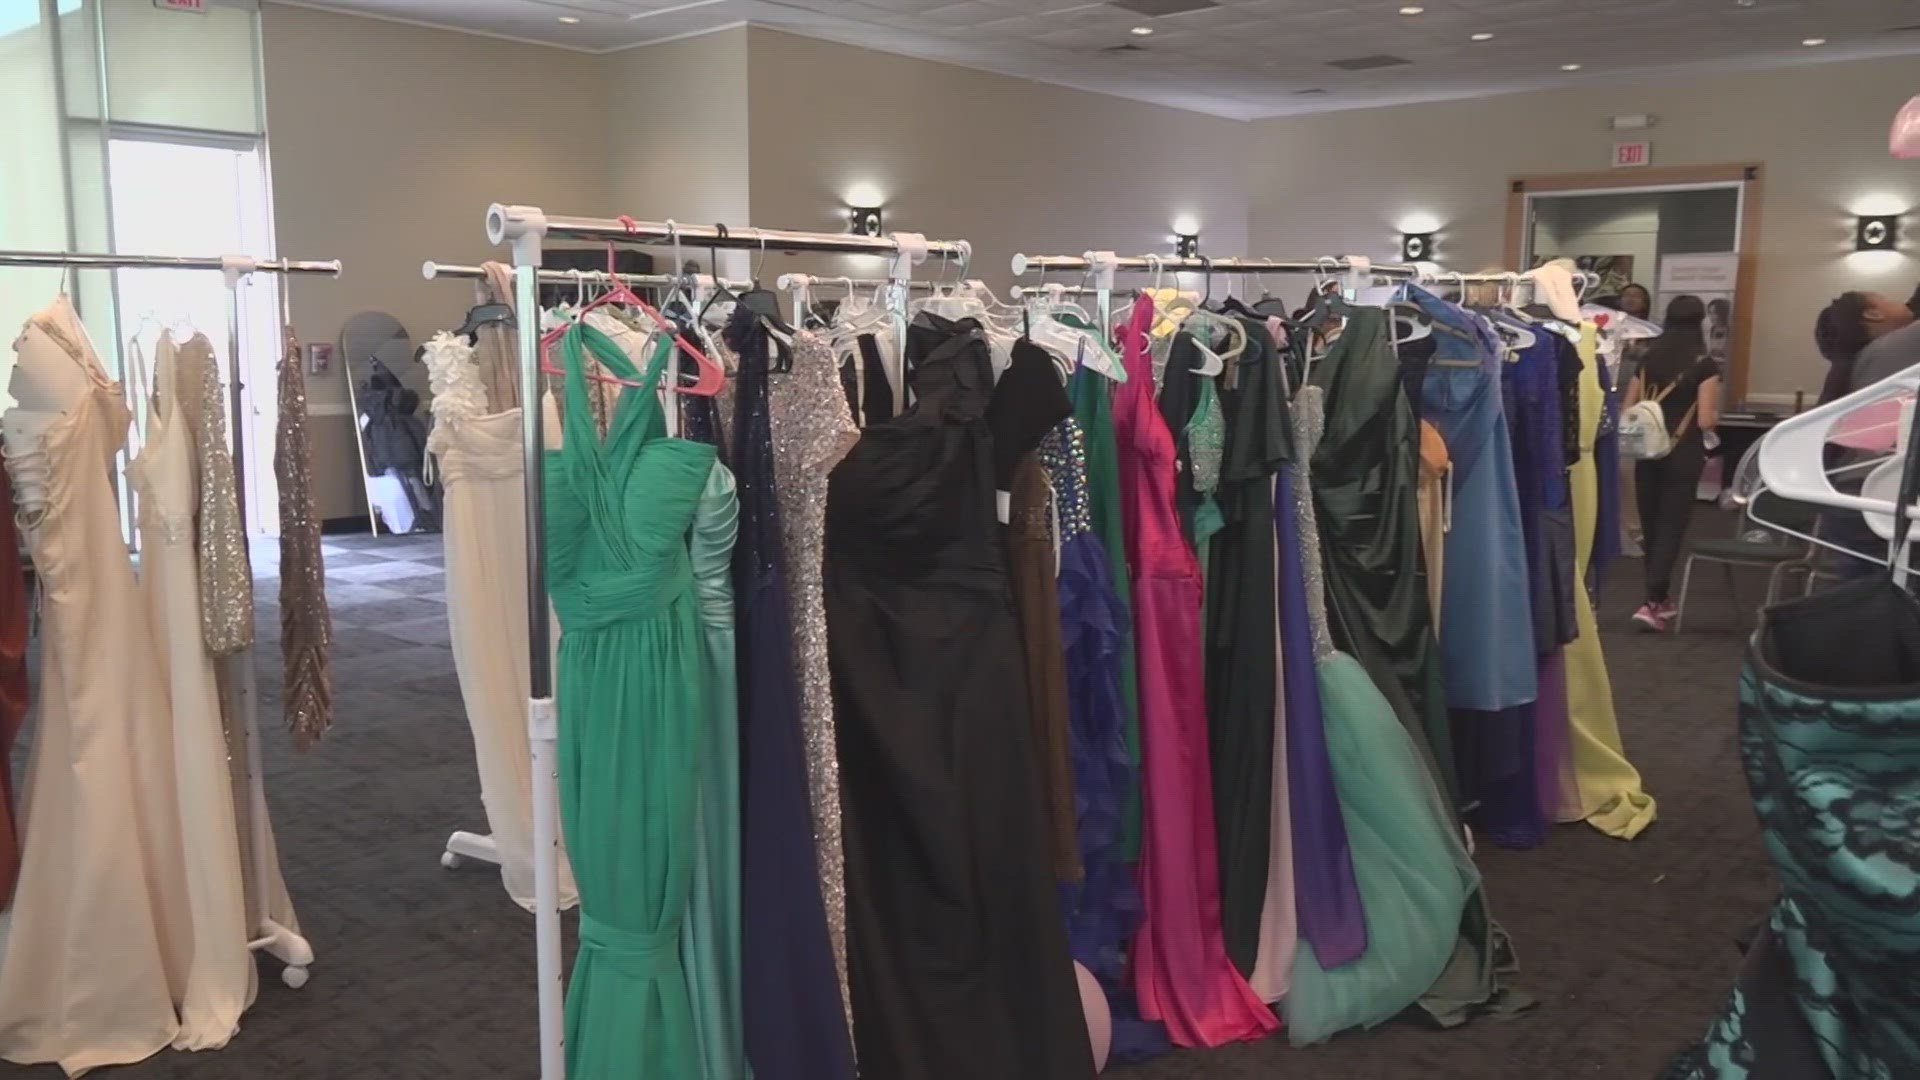 The “A Dress & A Blessing” event was hosted by Marcus Simmons Fashion & Arts Academy where young girls picked from hundreds of dresses.